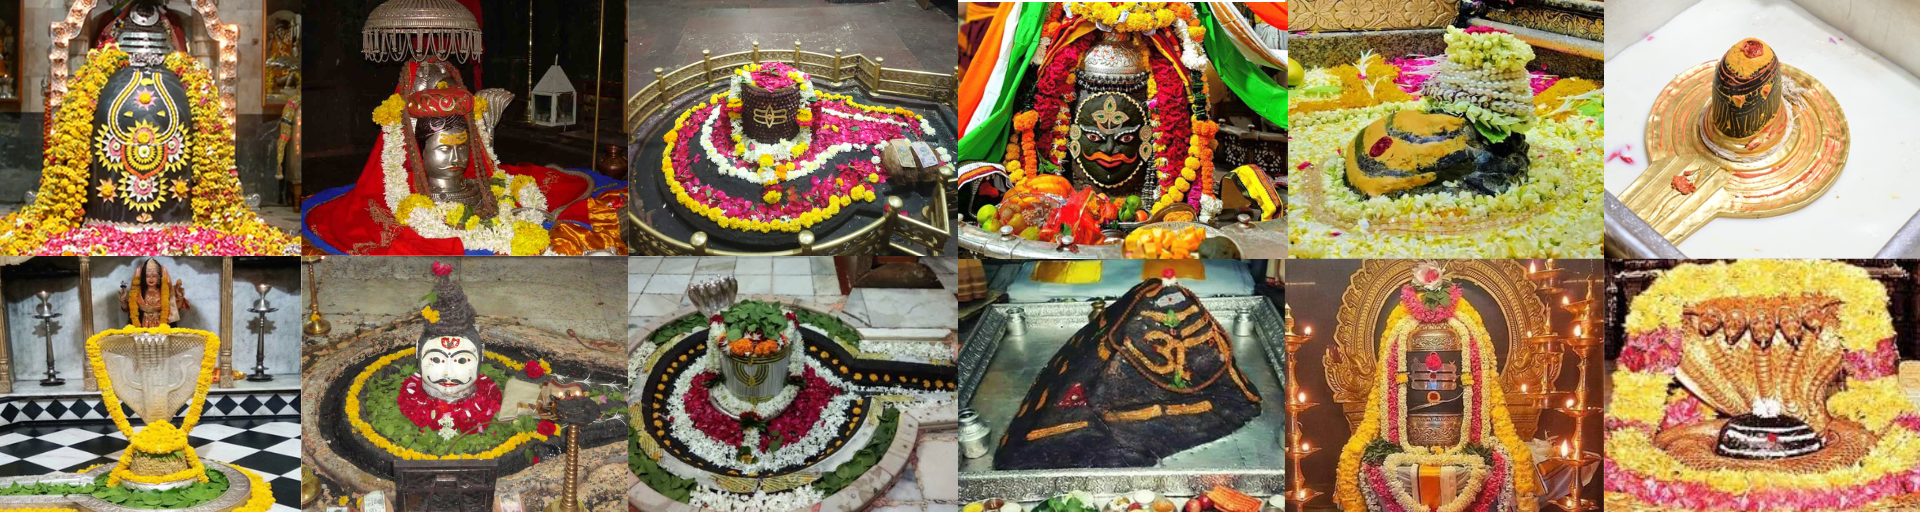 how to book 12 jyotirlinga tour package